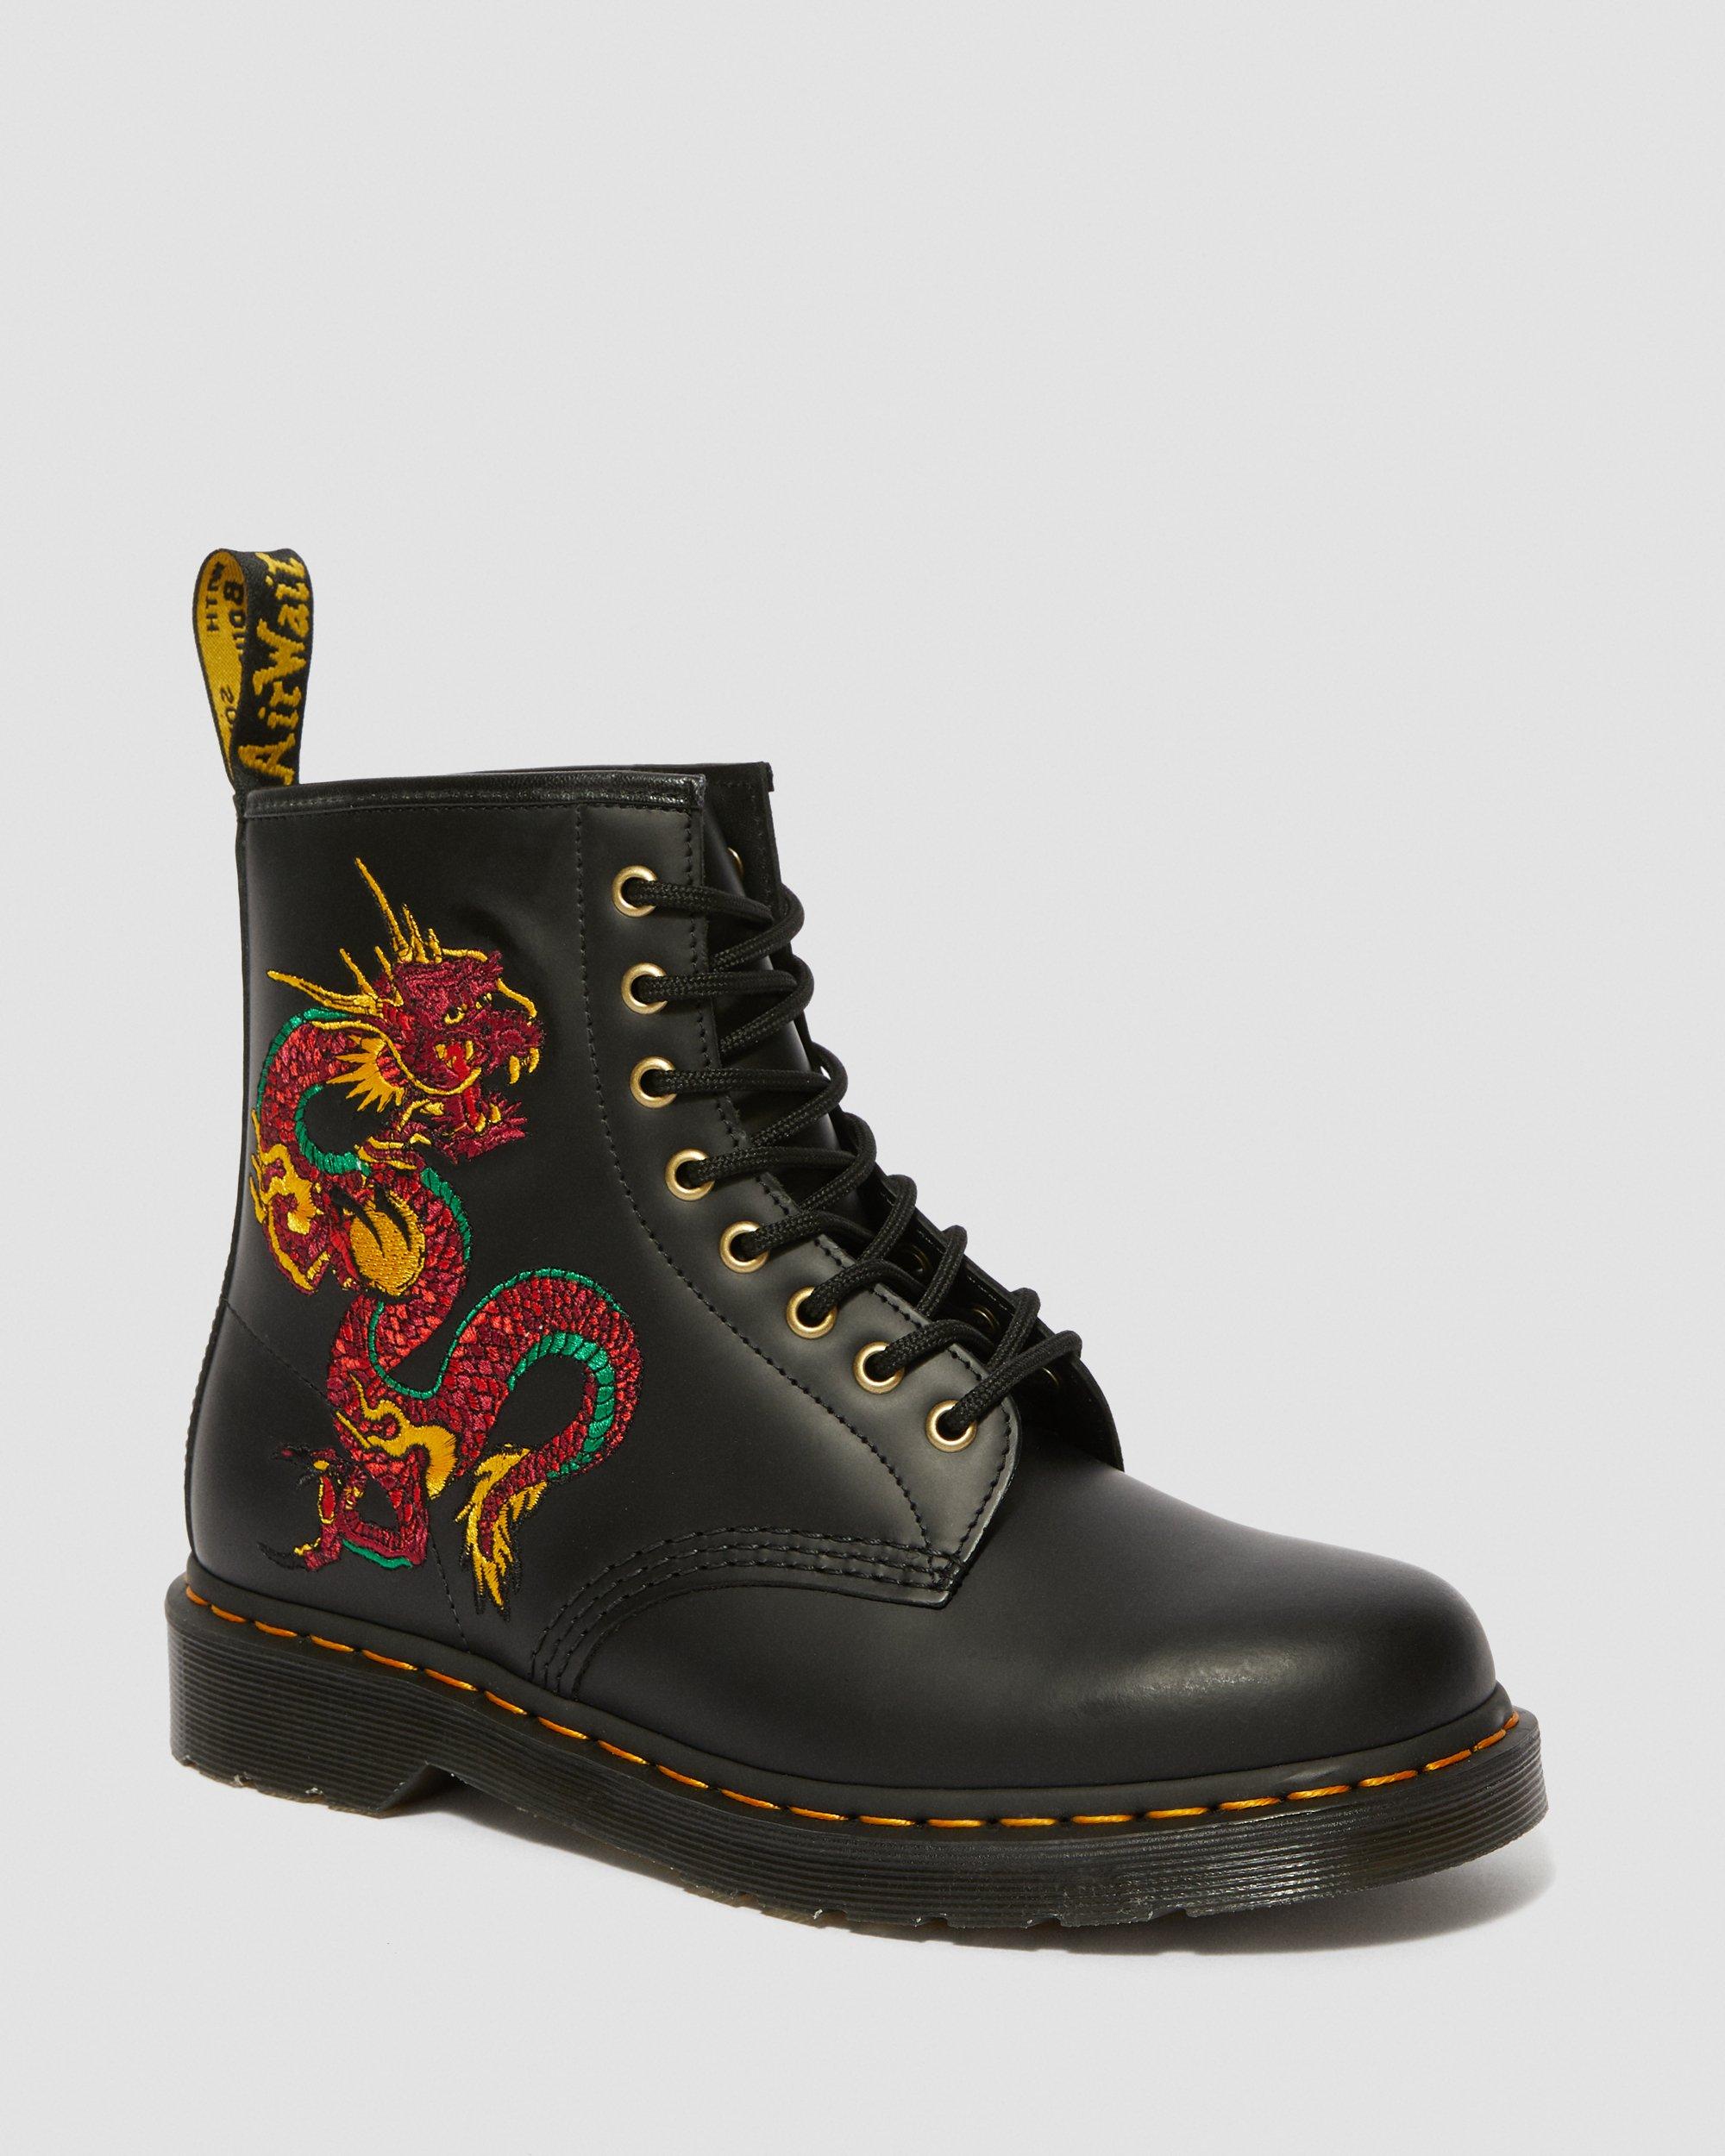 gemeenschap oneerlijk verband 1460 Leather Dragon Embroidered Lace Up Boots | Dr. Martens